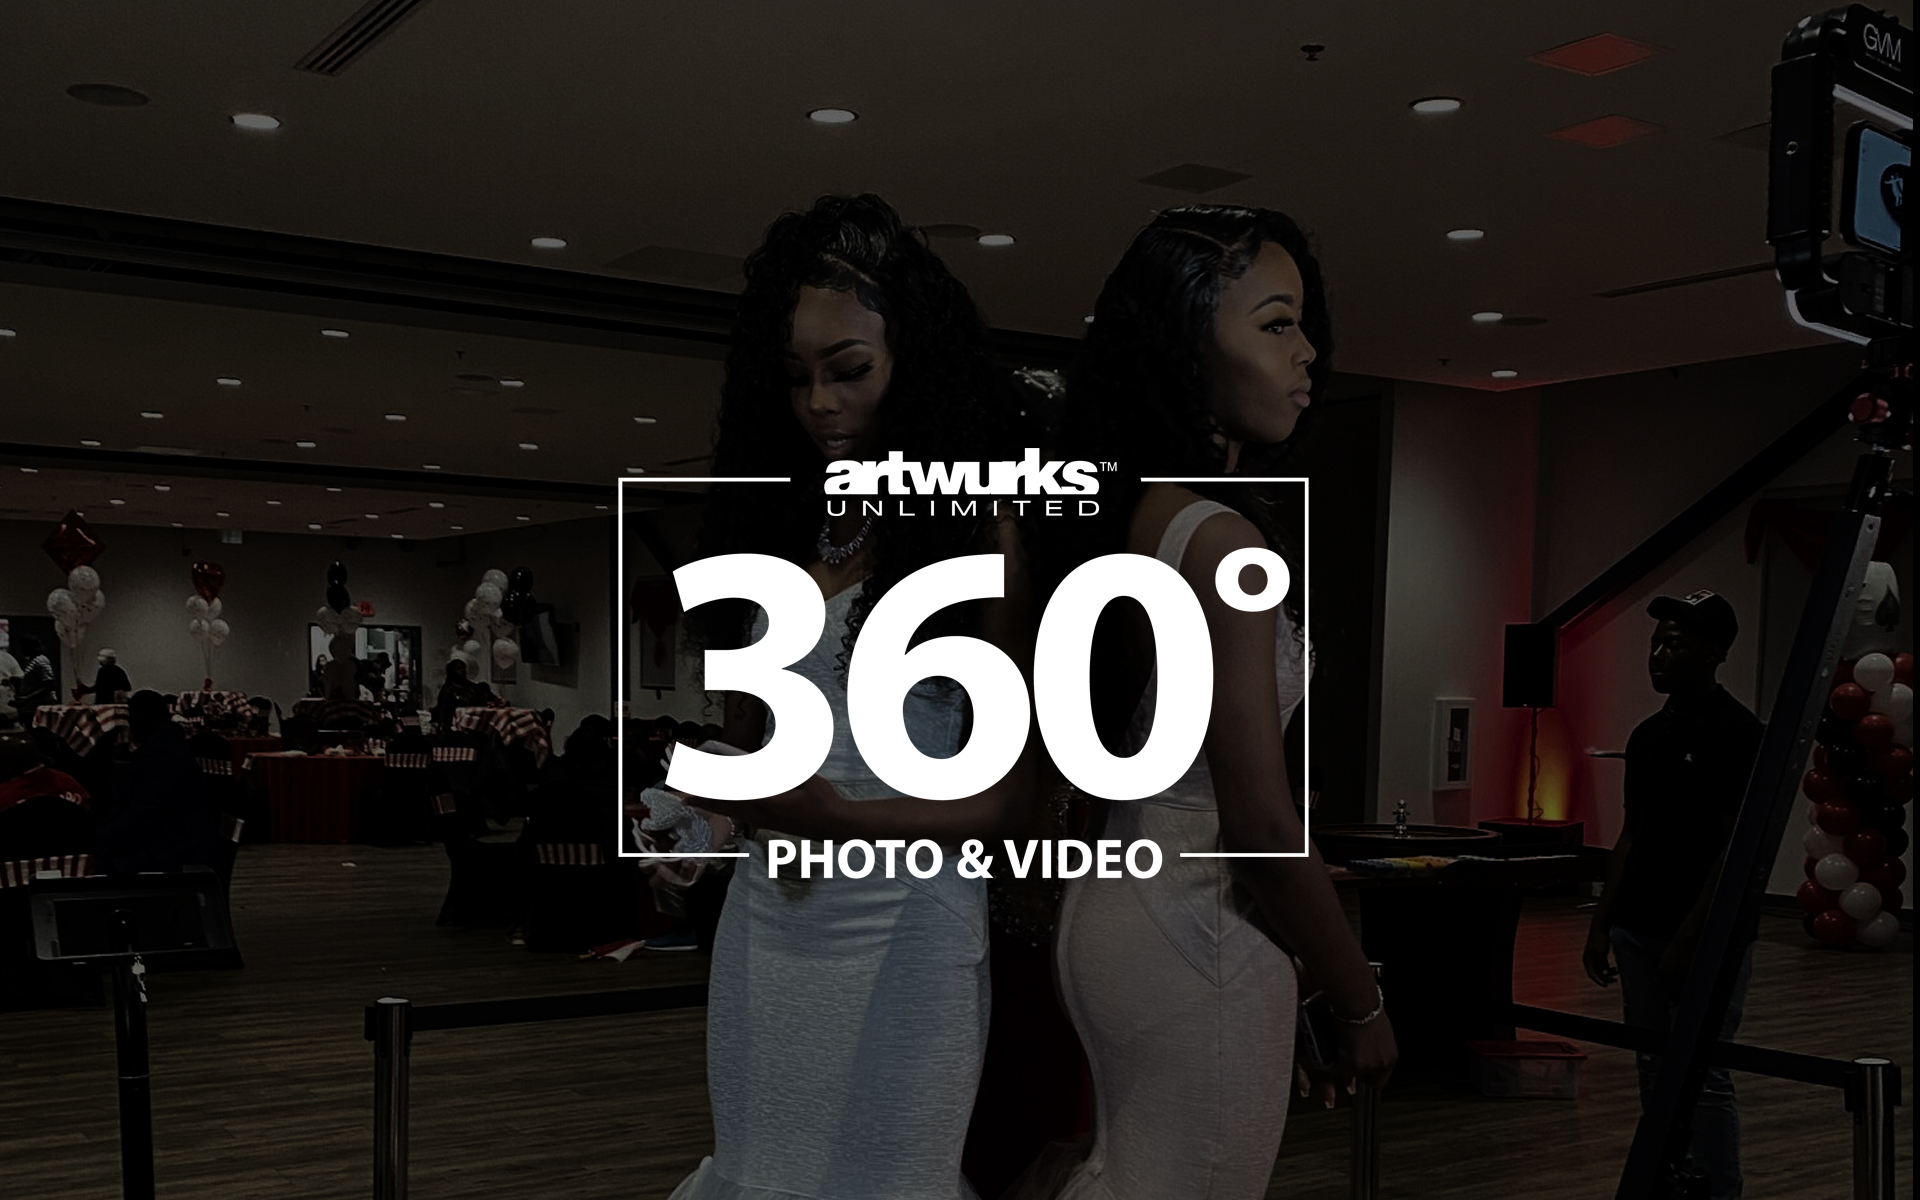 Artwurks Unlimited 360 Photo/Video Booth